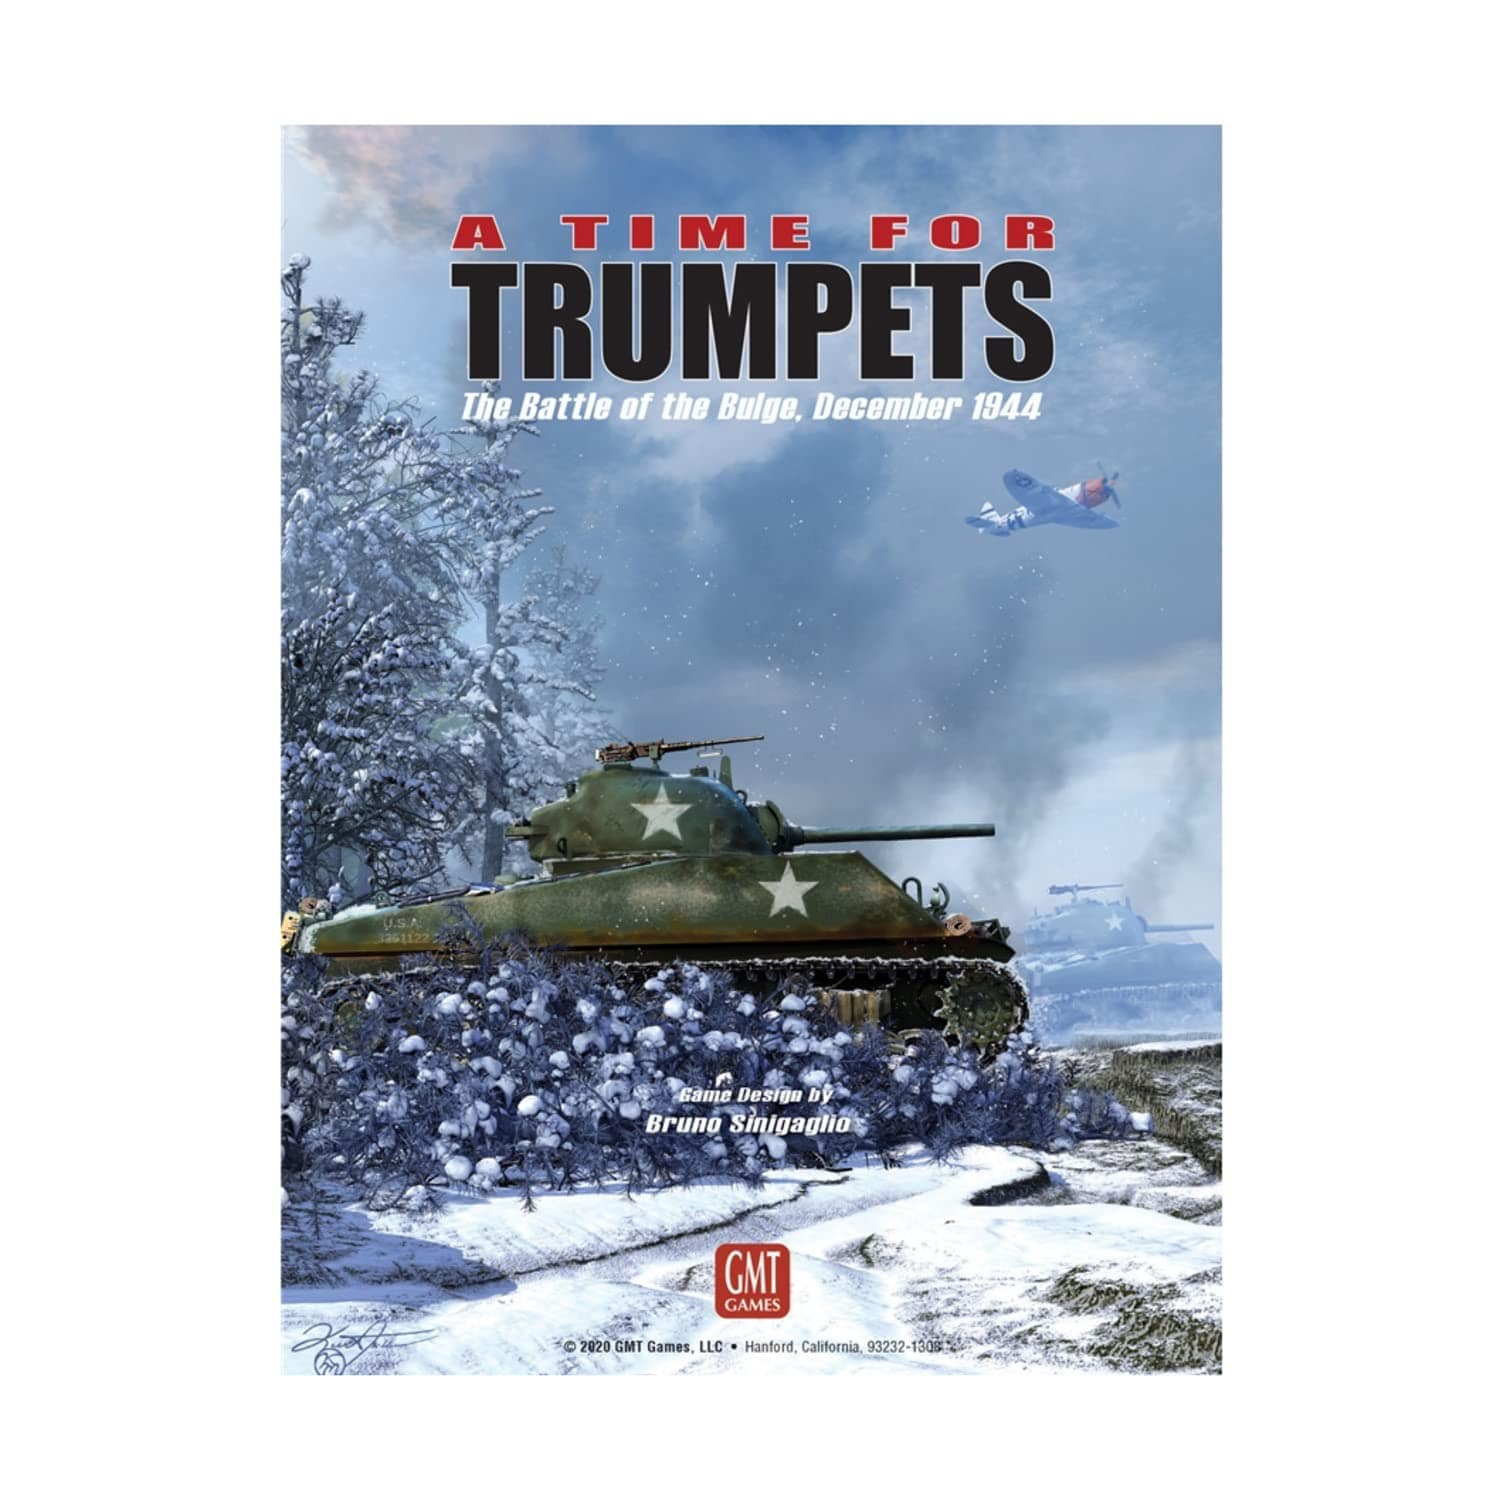 Gmt Games A Time for Trumpets: The Battle of the Bulge, December 1944 - Lost City Toys